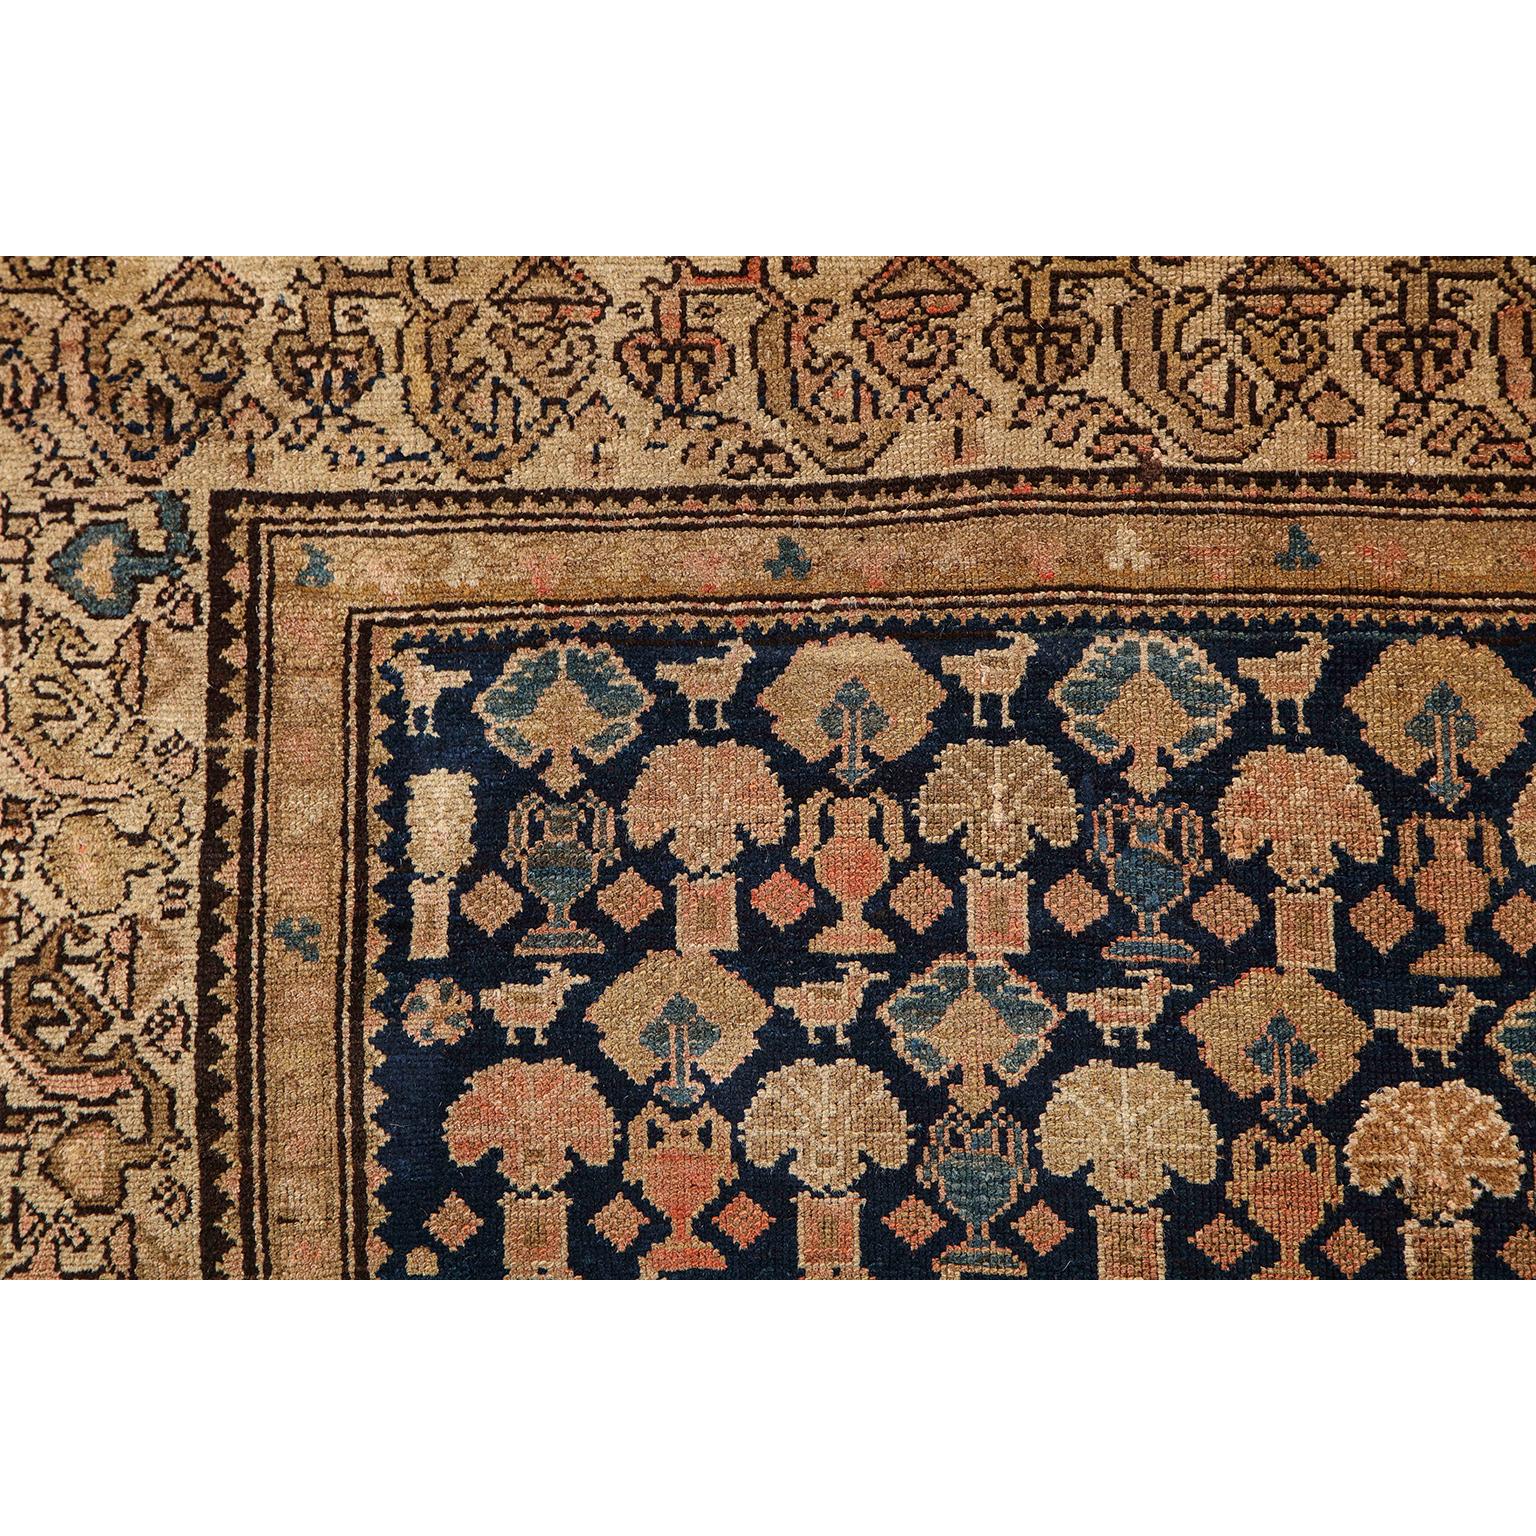 Antique 1900s Persian Malayer Rug, Flower Motifs, Wool, 5' x 7' For Sale 2